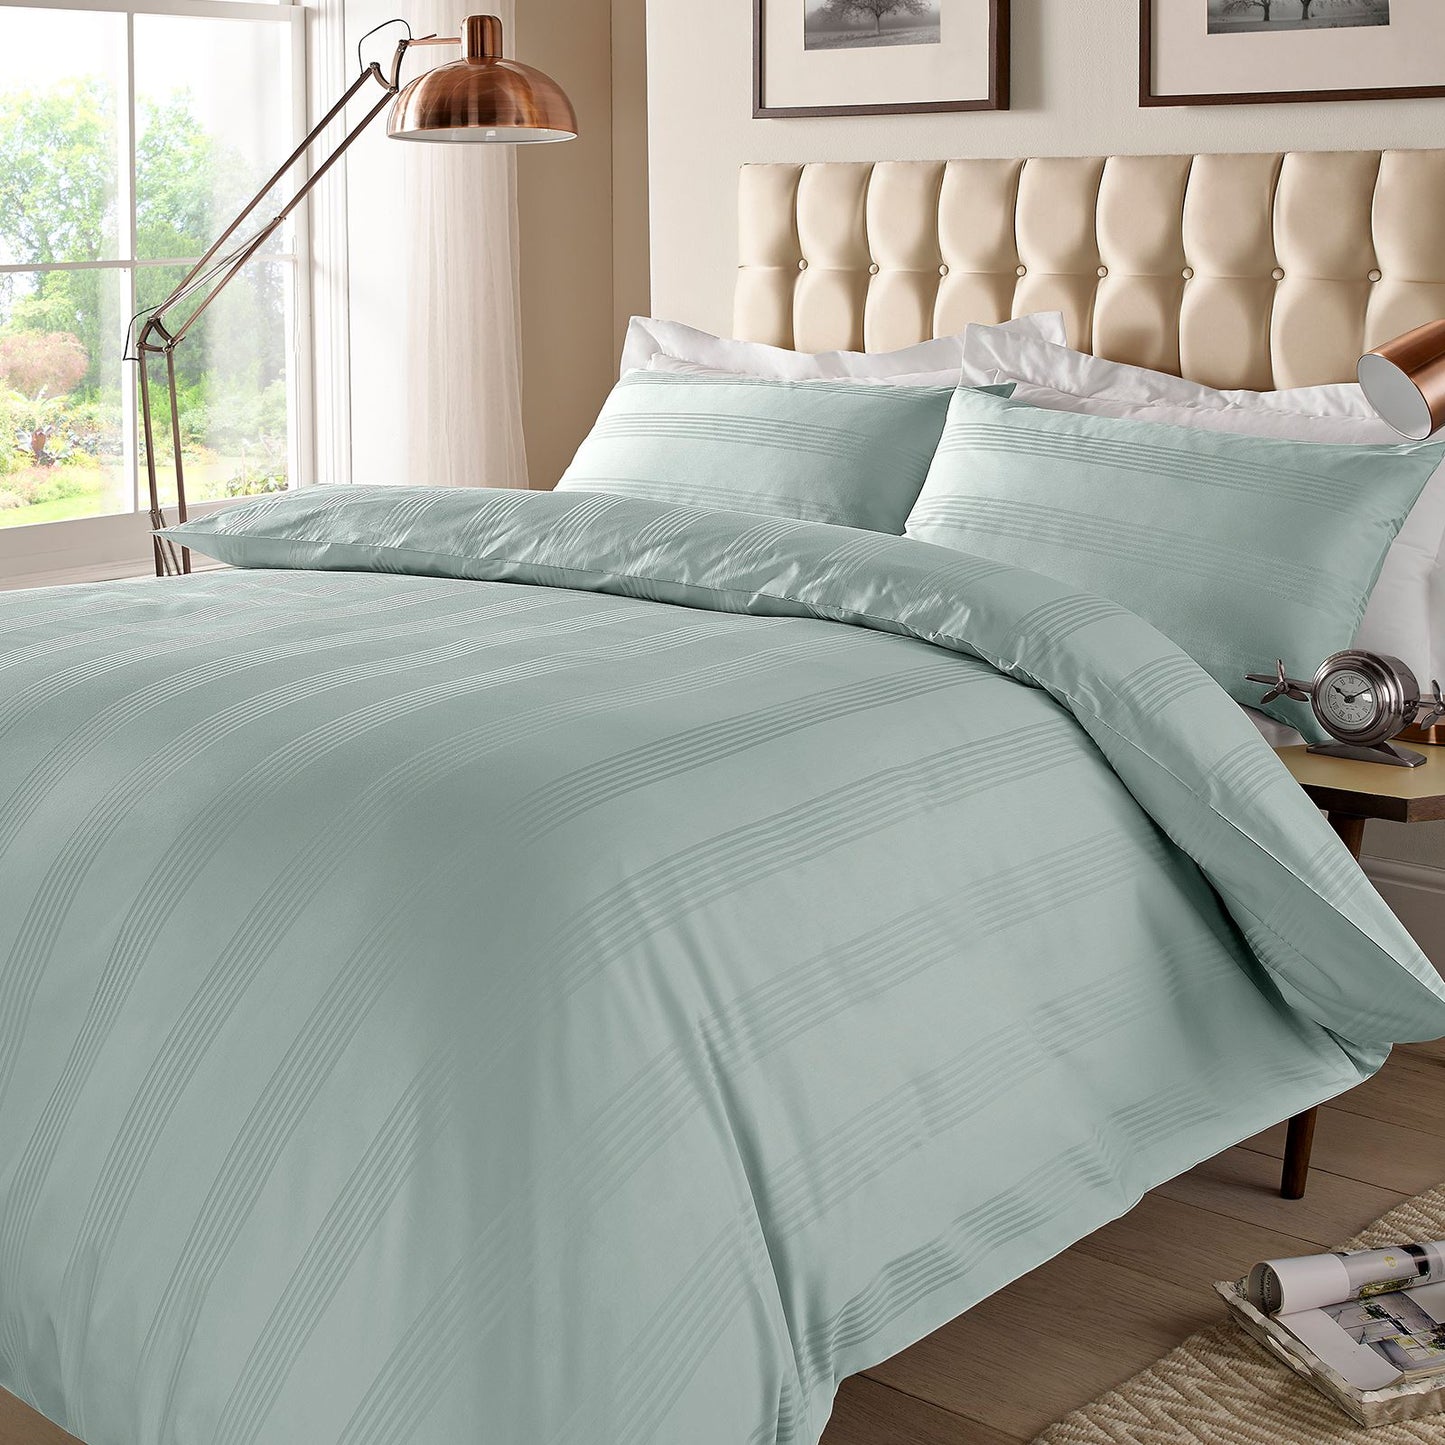 Add a Pop of Color to Your Bedding with a 100% Cotton Multi Stripe Duvet Set